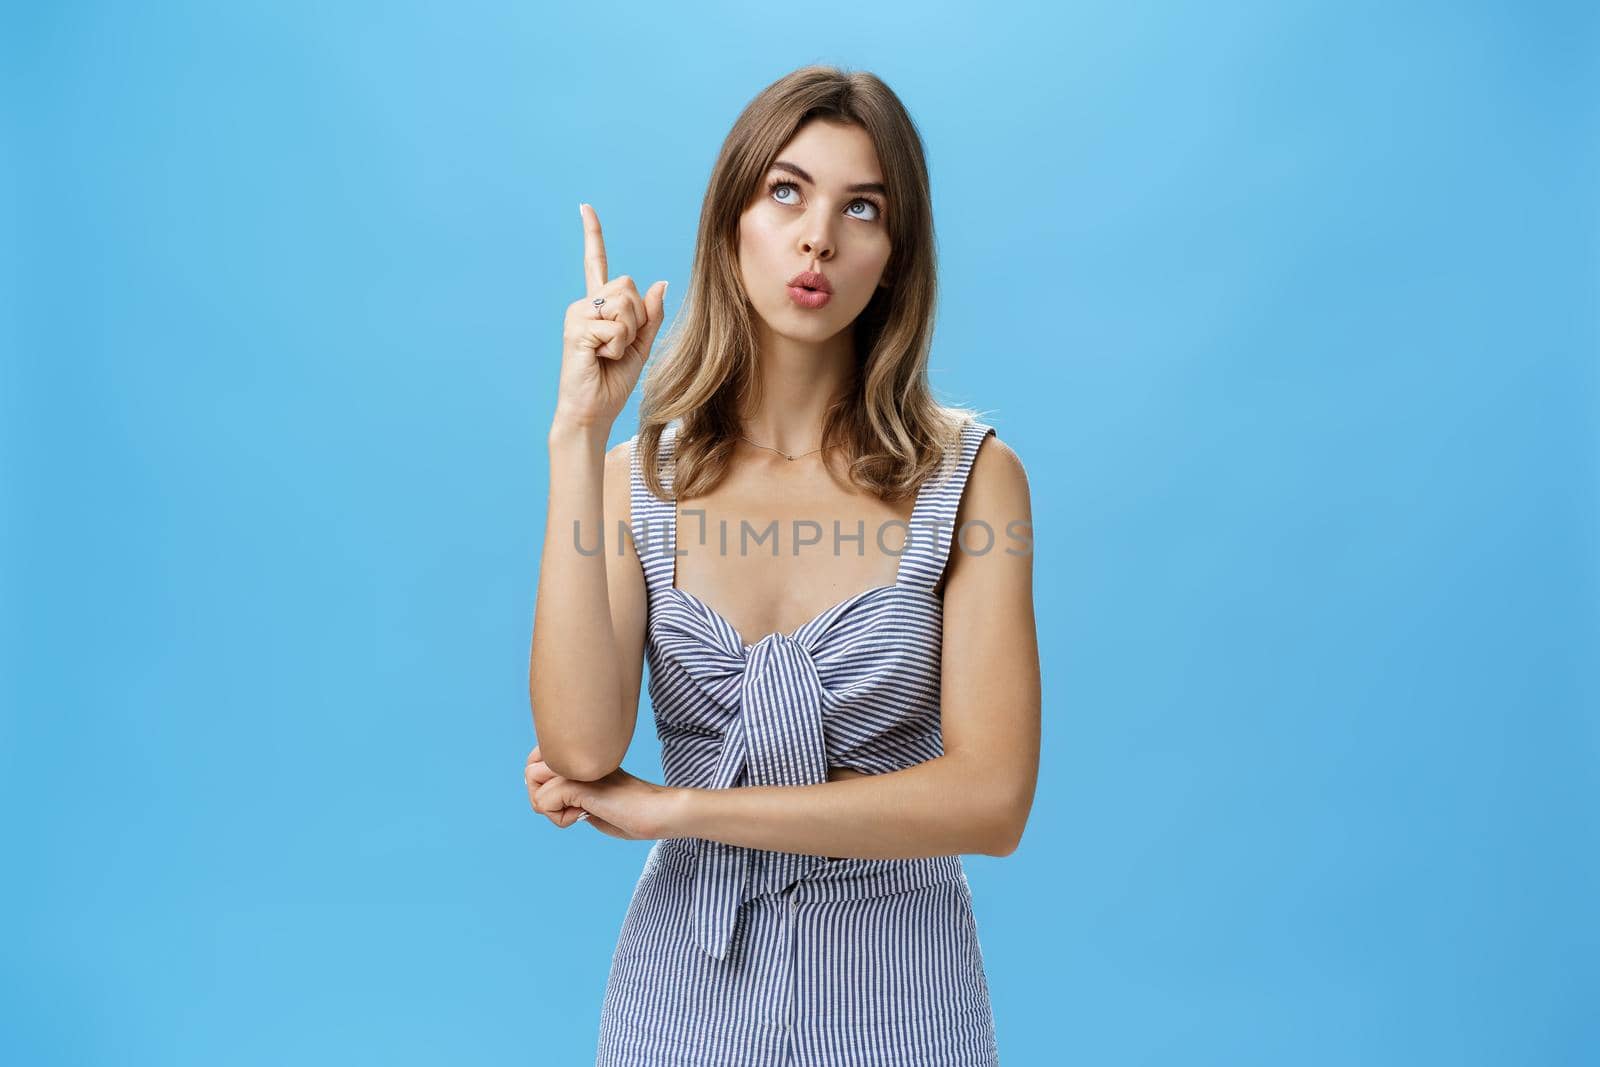 Portrait of beautiful creative cute adult woman daydreaming or thinking looking up with thoughtful expression trying think, raising index finger in eureka gesture standing upright like A-student.